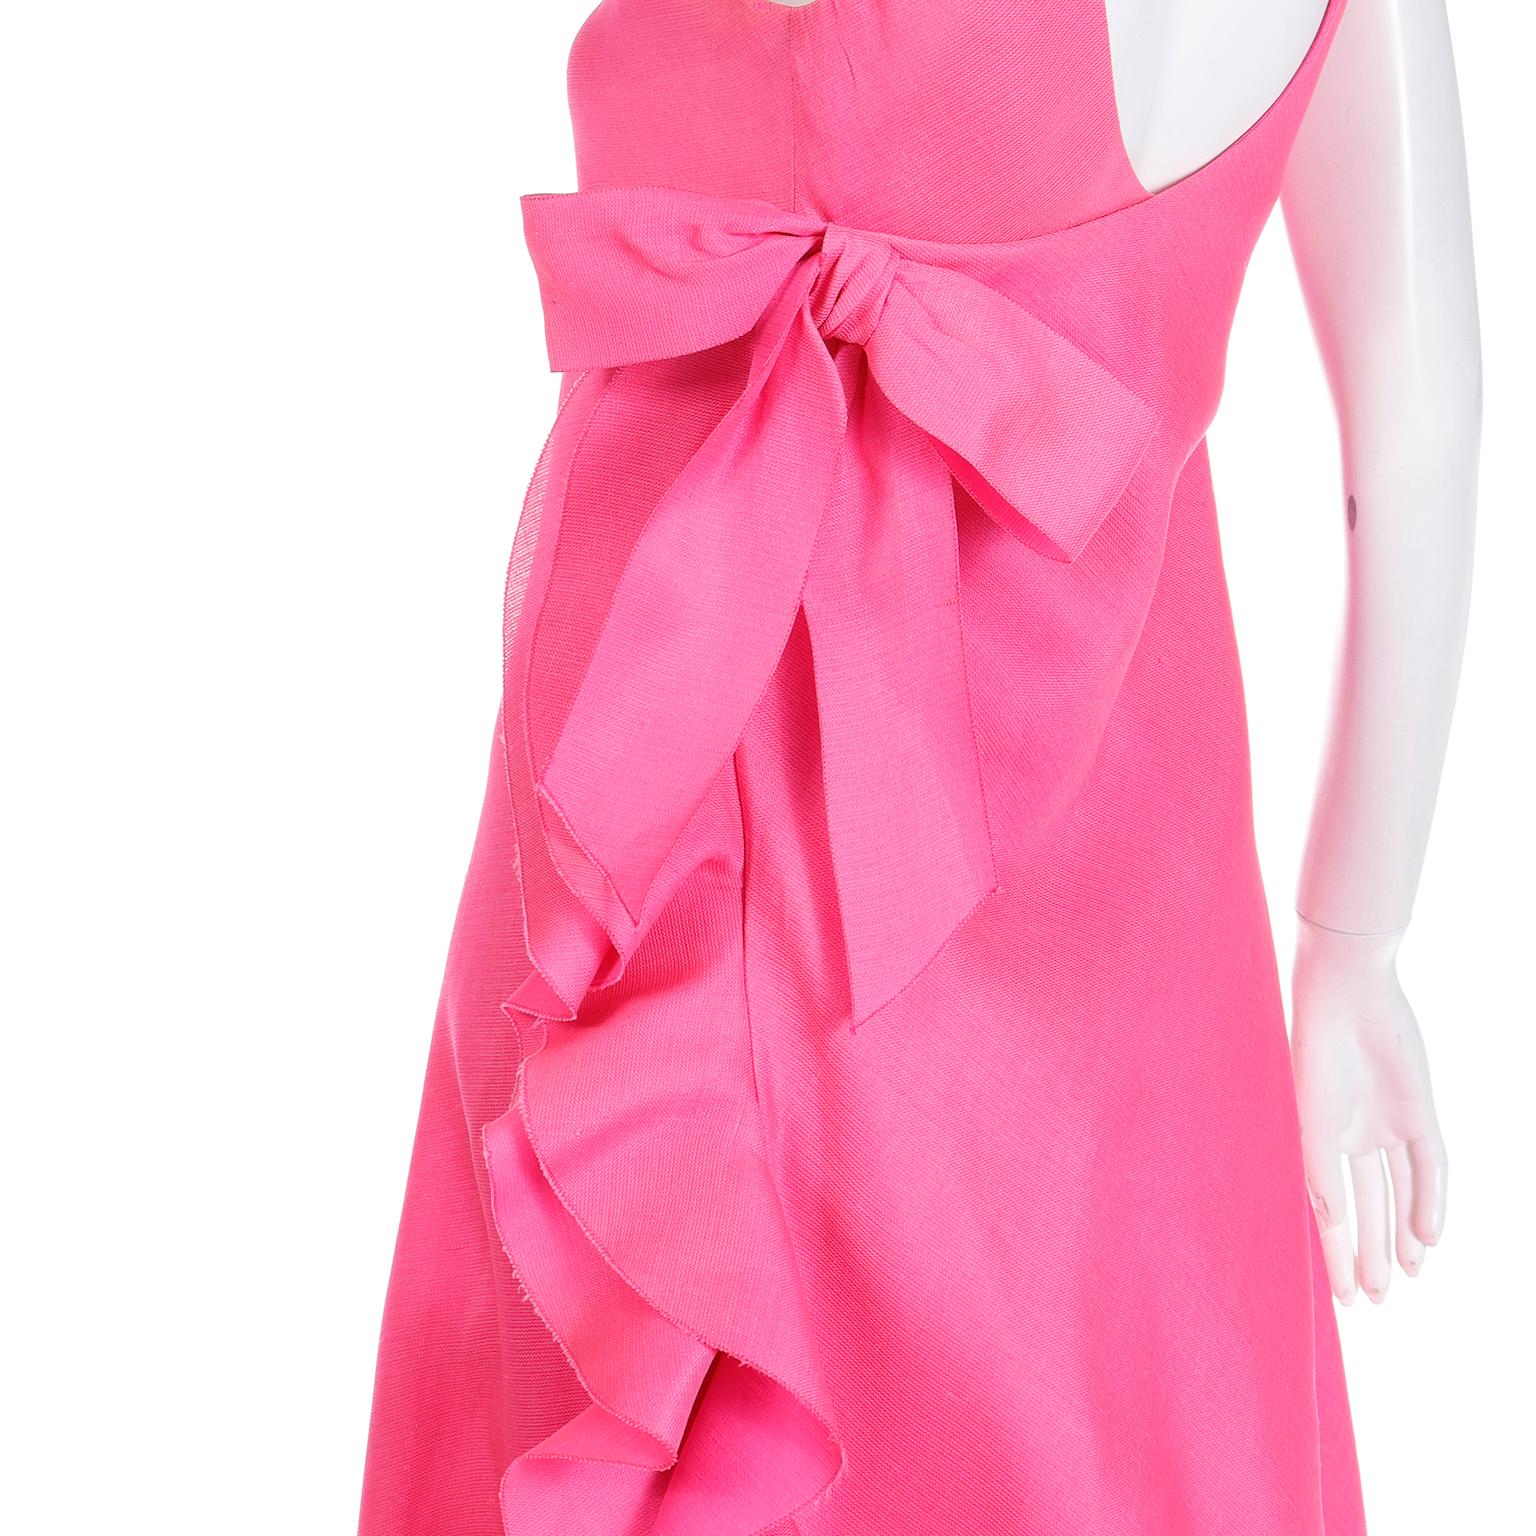 1971 Christian Dior Haute Couture Pink Ruffled Runway Evening Dress Grace Kelly  For Sale 13